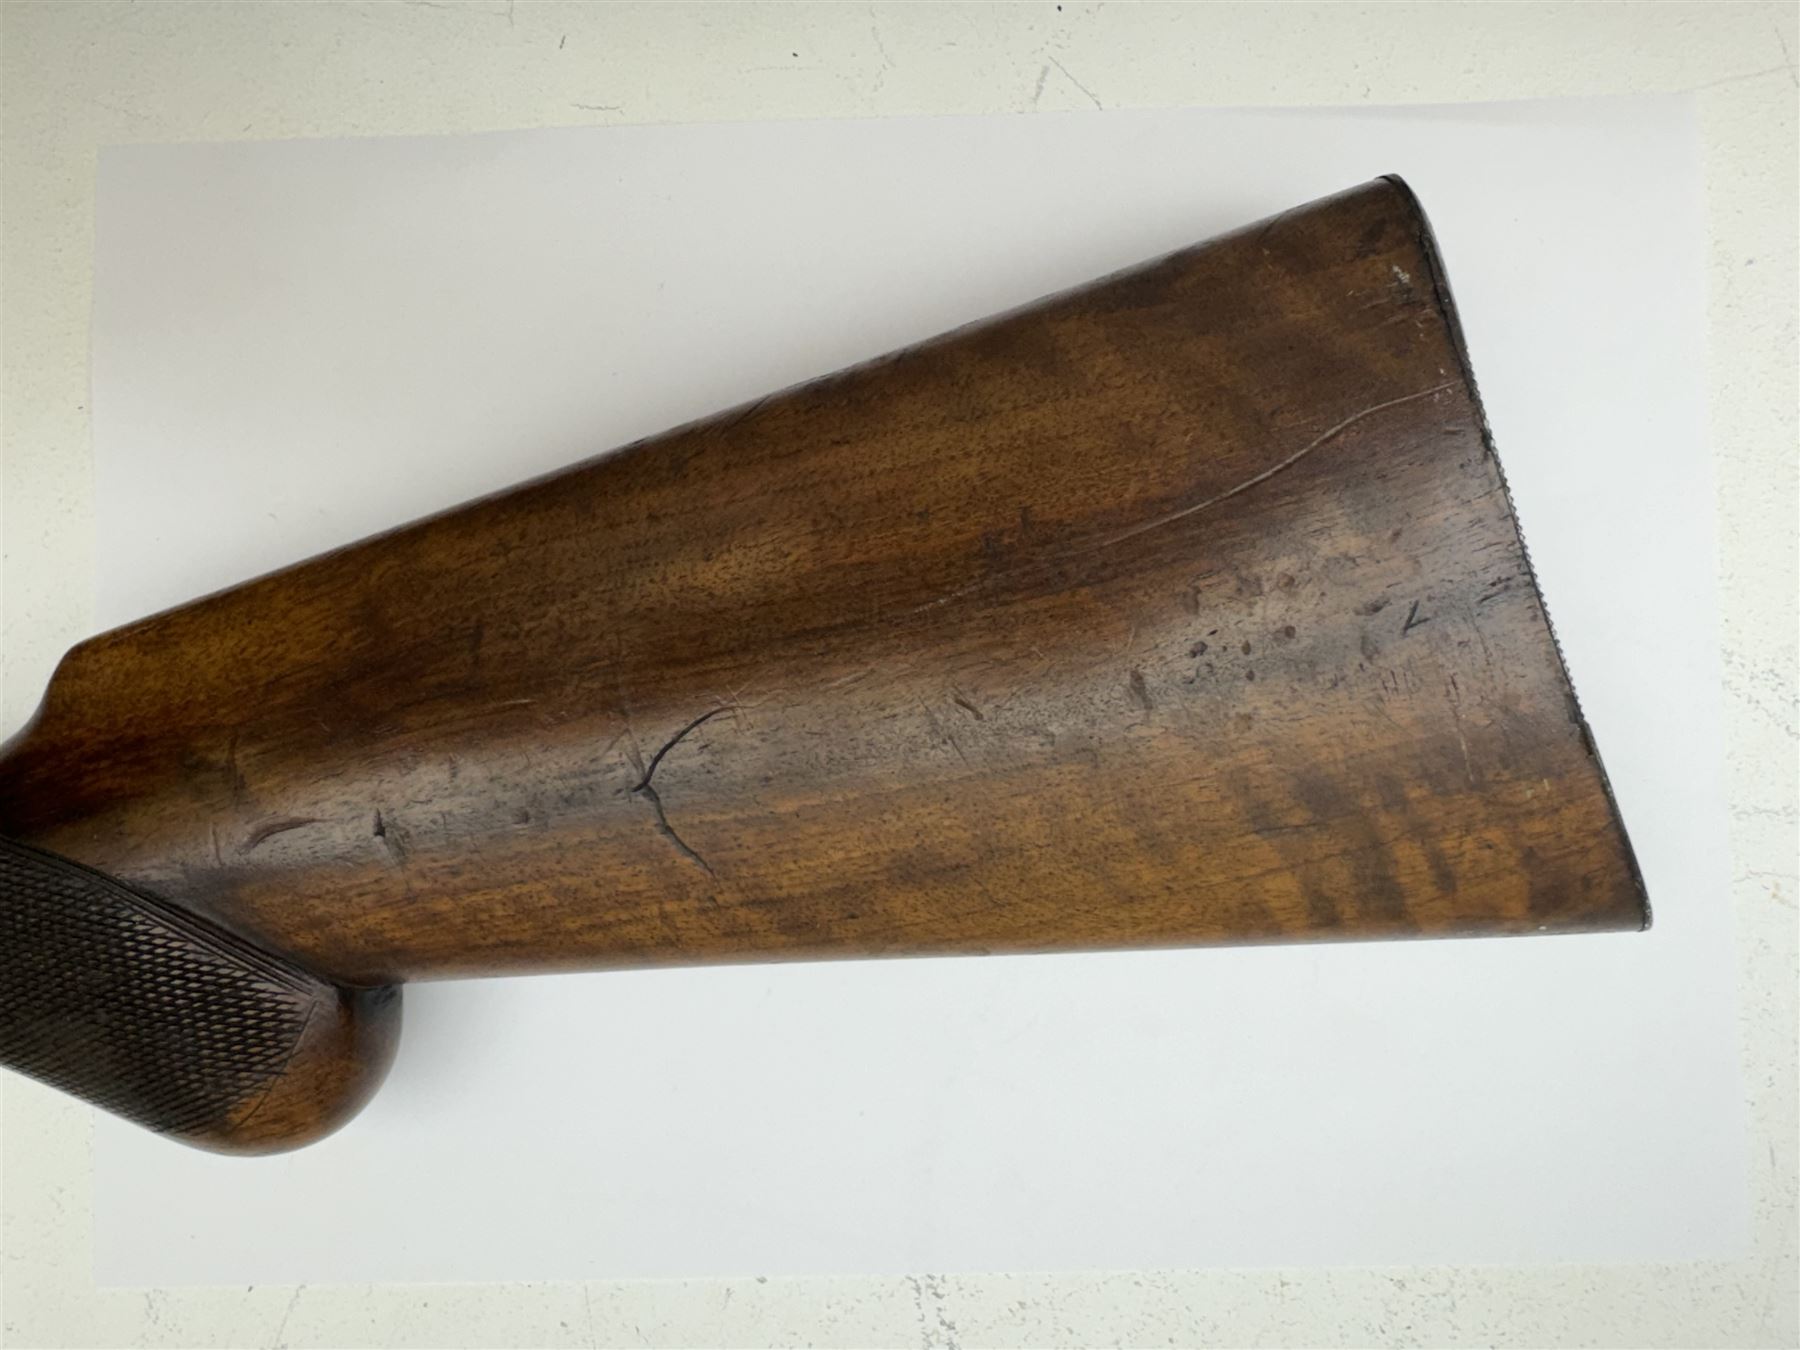 SHOTGUN CERTIFICATE REQUIRED - foreign 12-bore double trigger side by side double barrel shotgun ser - Image 8 of 16